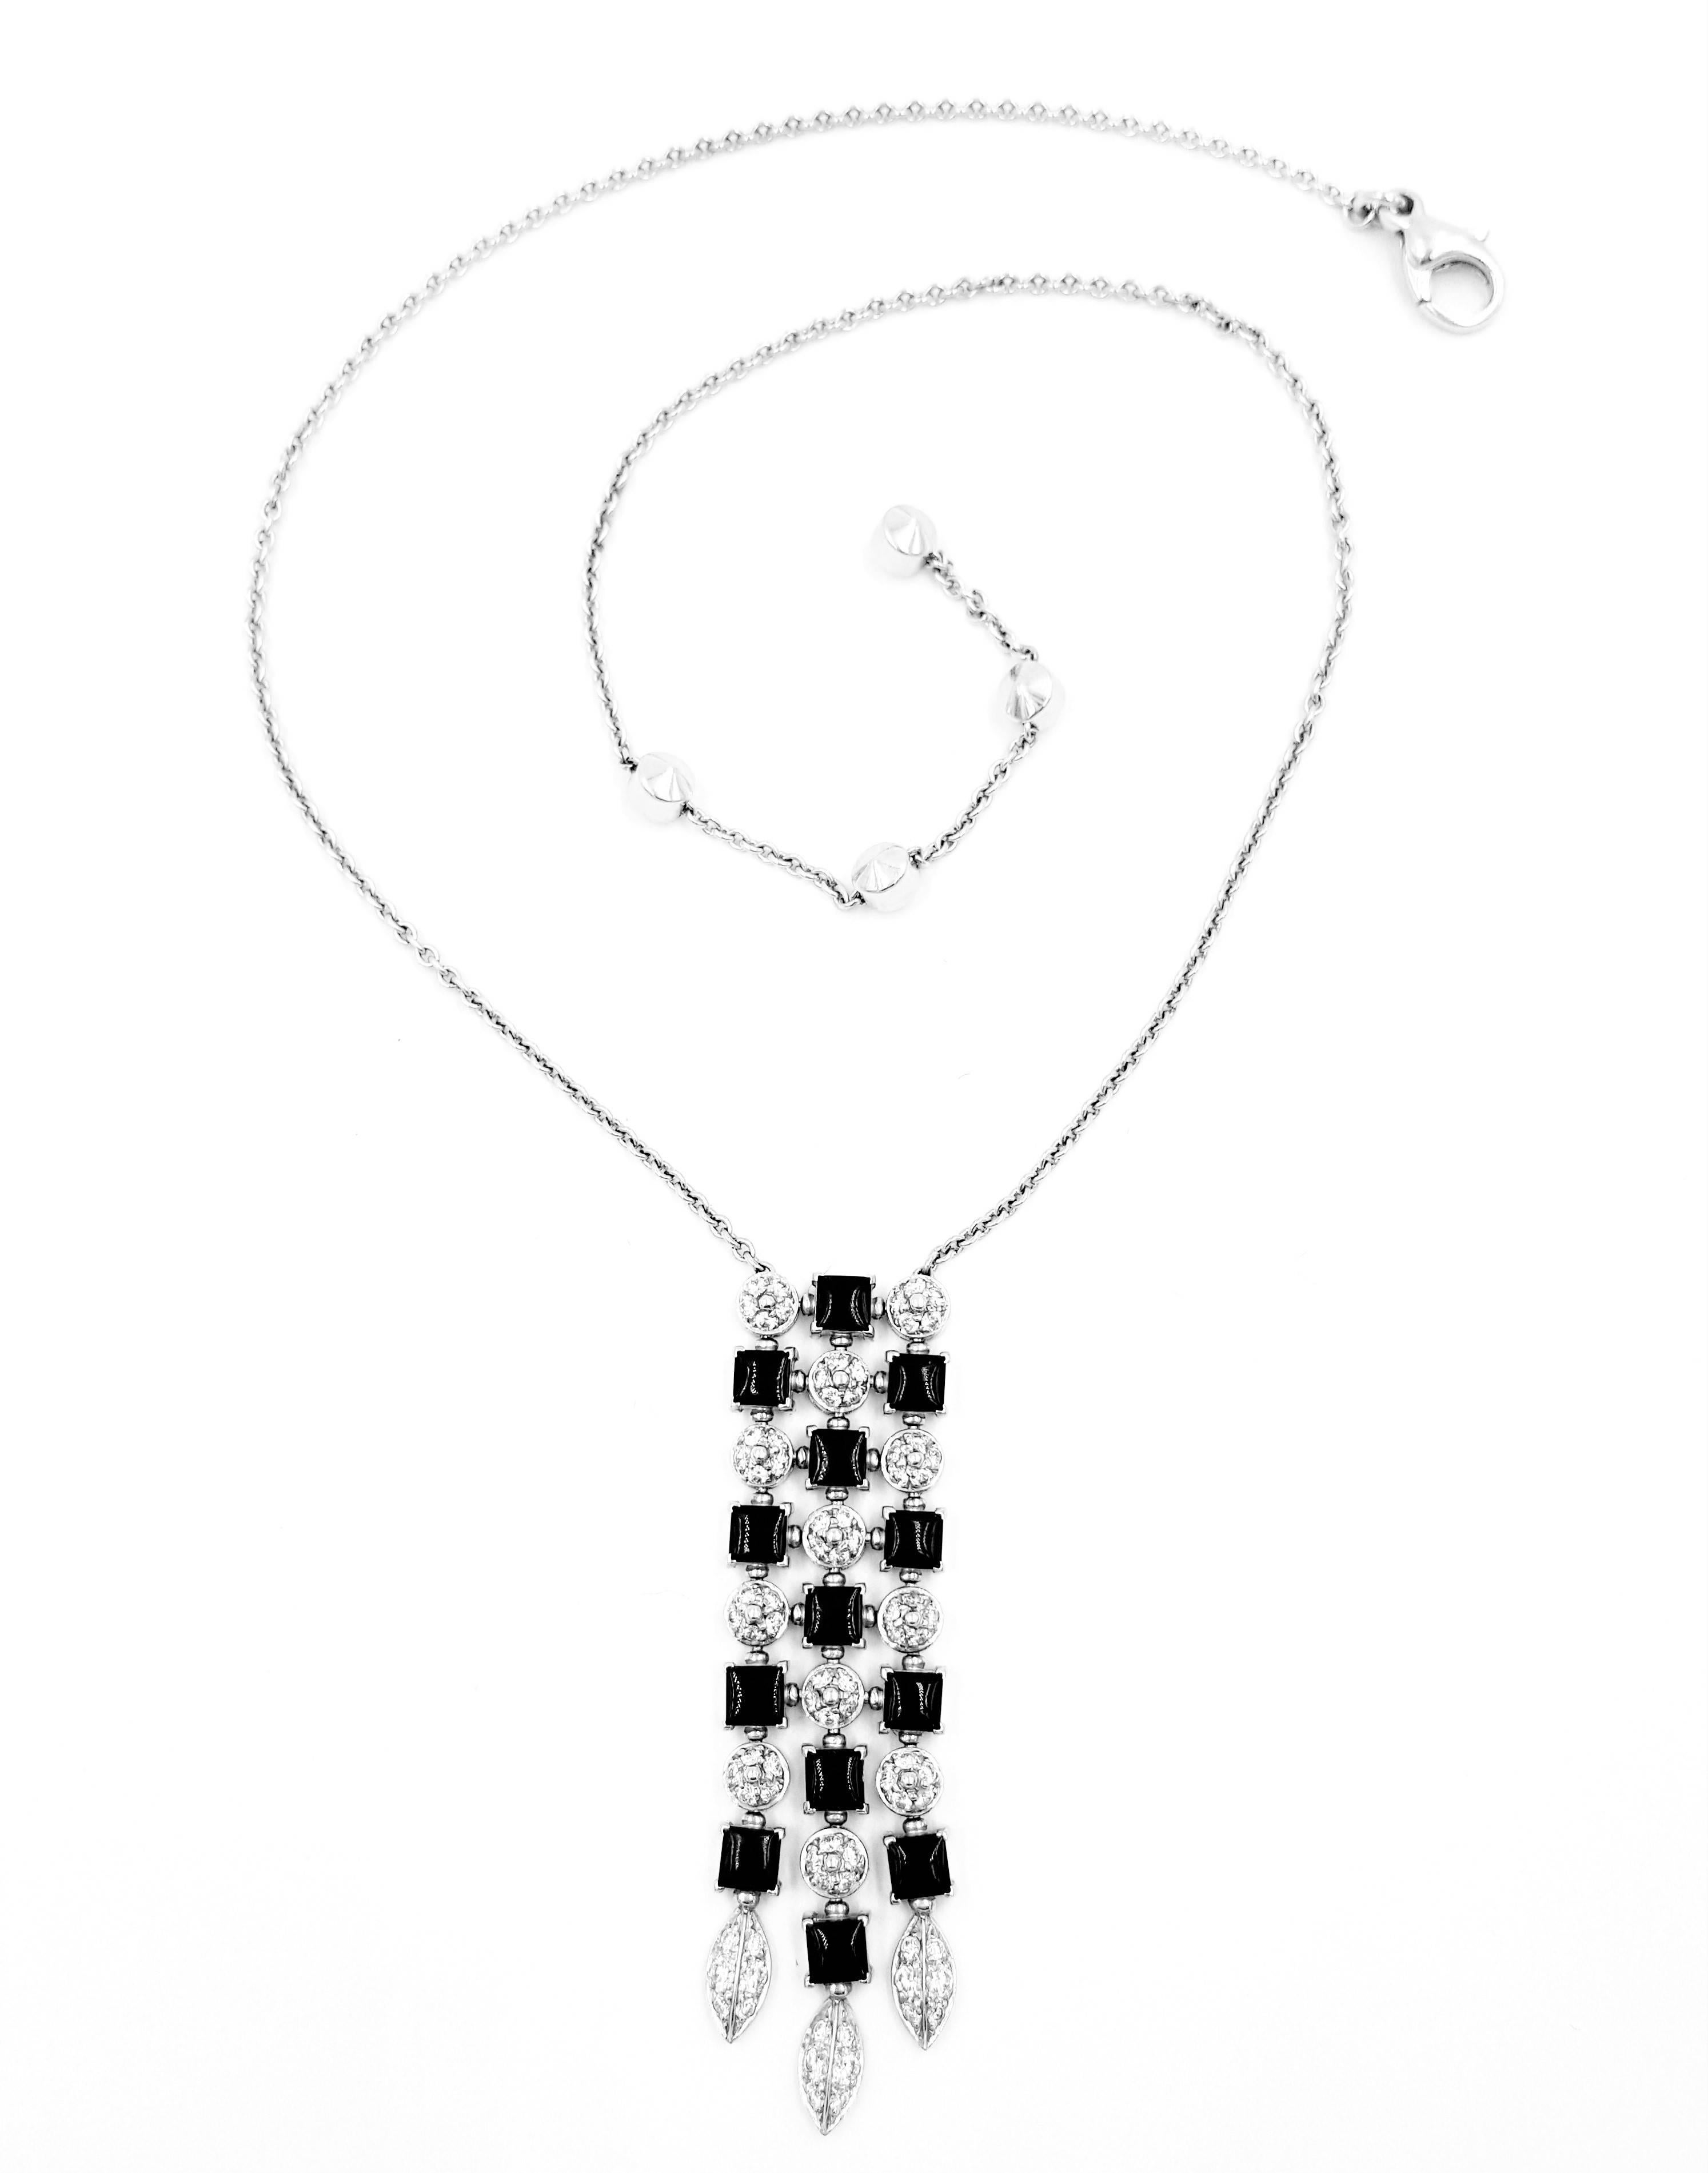 This stunning 18k White Gold, Diamond, and Onyx Pendant Necklace by Bulgari.  Featuring 85 round brilliant cut diamonds VS1 clarity, G white in color weighing a total 1.65 carats and 13 black onyx stones  This beautiful piece is 22 grams. The Chain